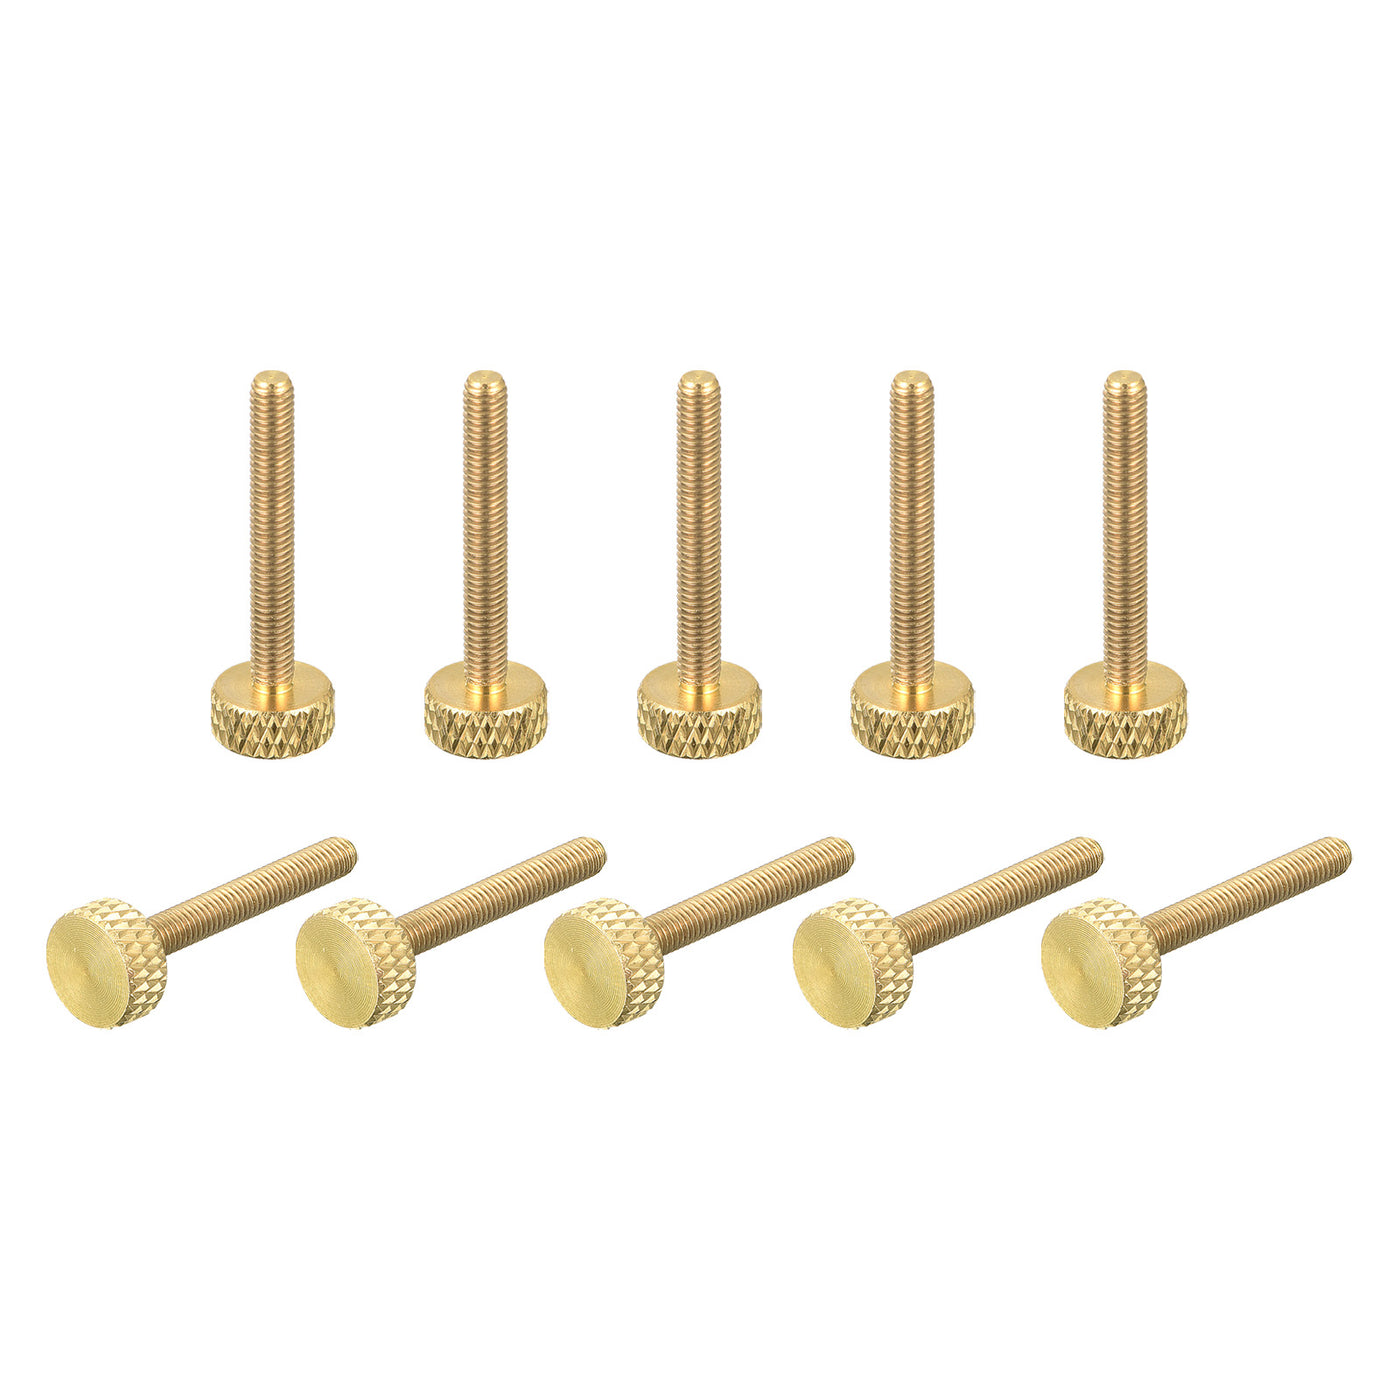 uxcell Uxcell 10Pcs Brass Knurled Thumb Screws, M3x25mm  Flat Grip Bolt Knobs Fasteners for Electronic, Mechanical